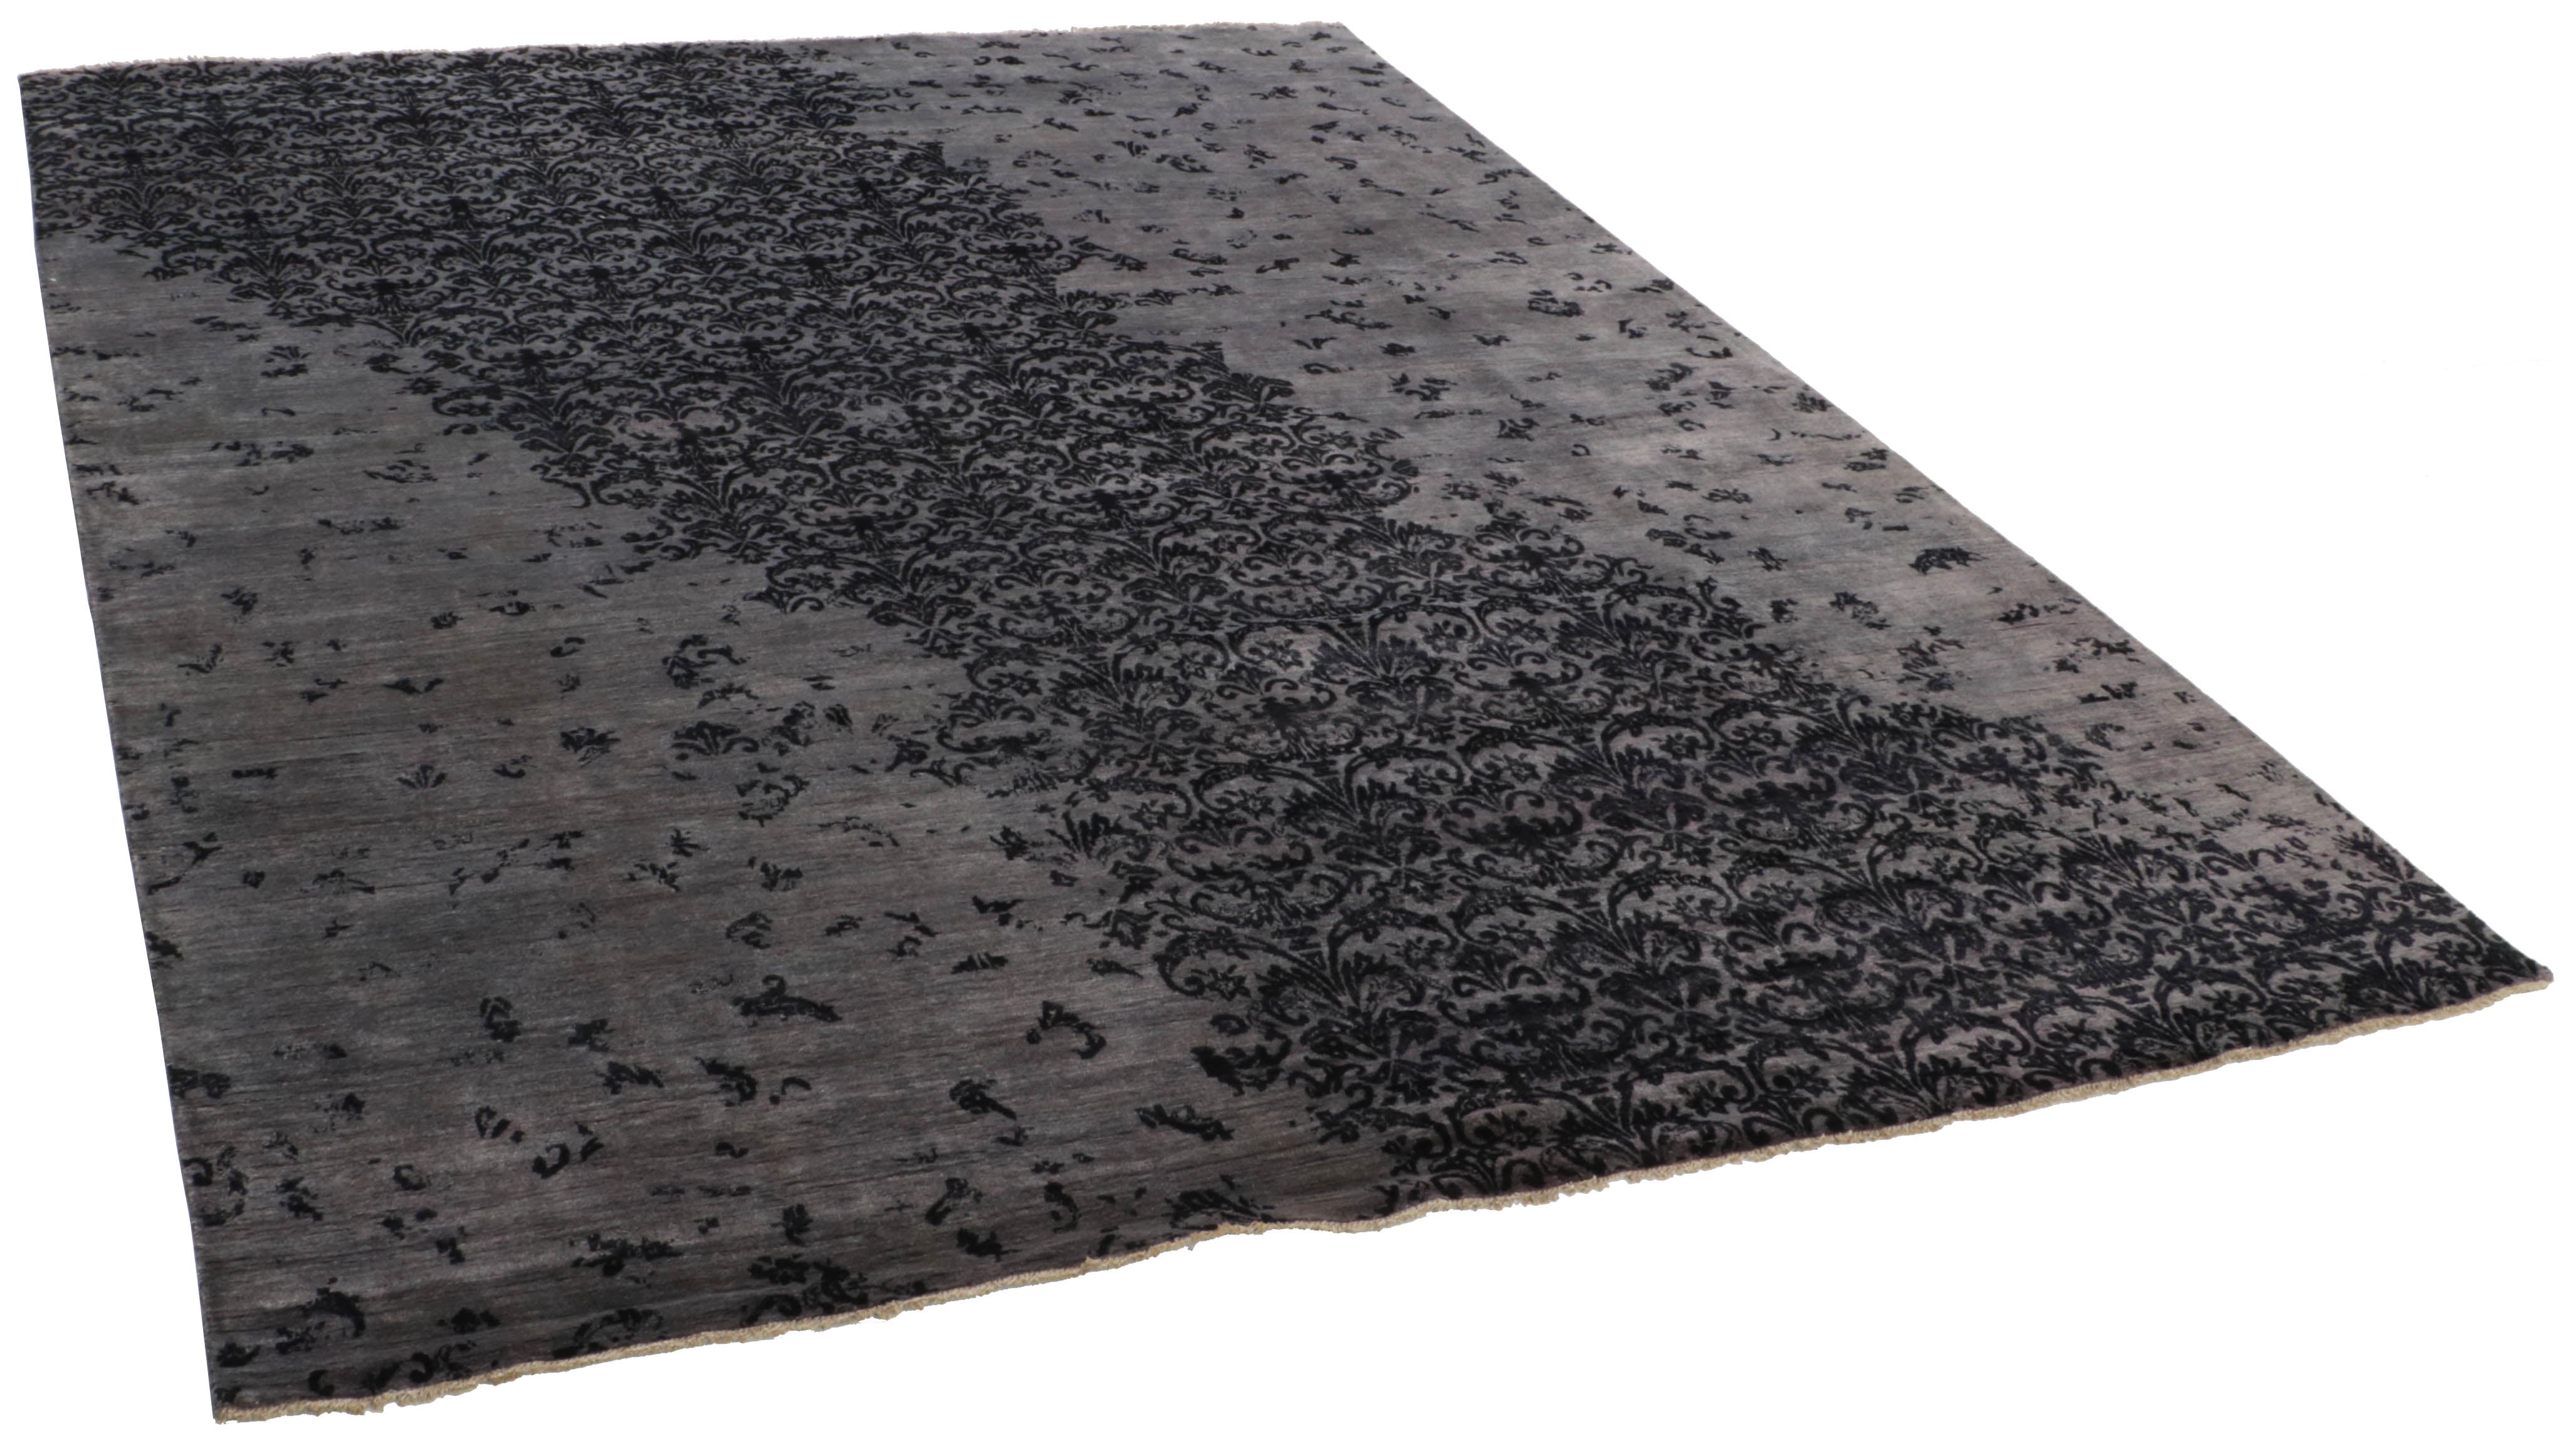 Authentic oriental rug with a damask pattern in grey